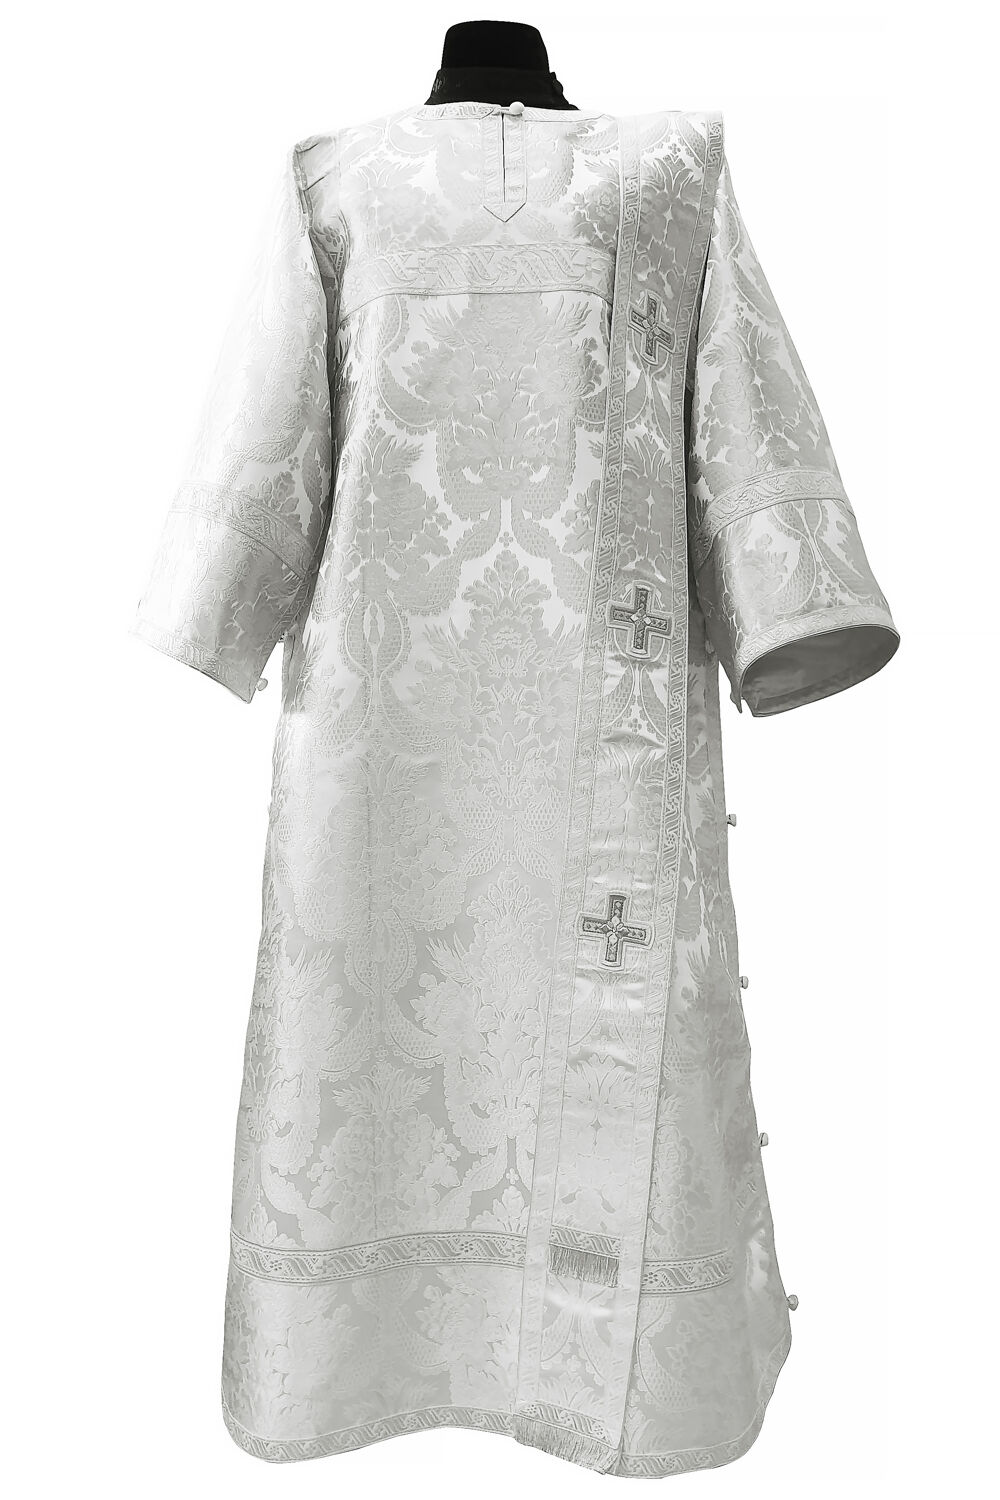 Old Believers Vestment of Deacon white